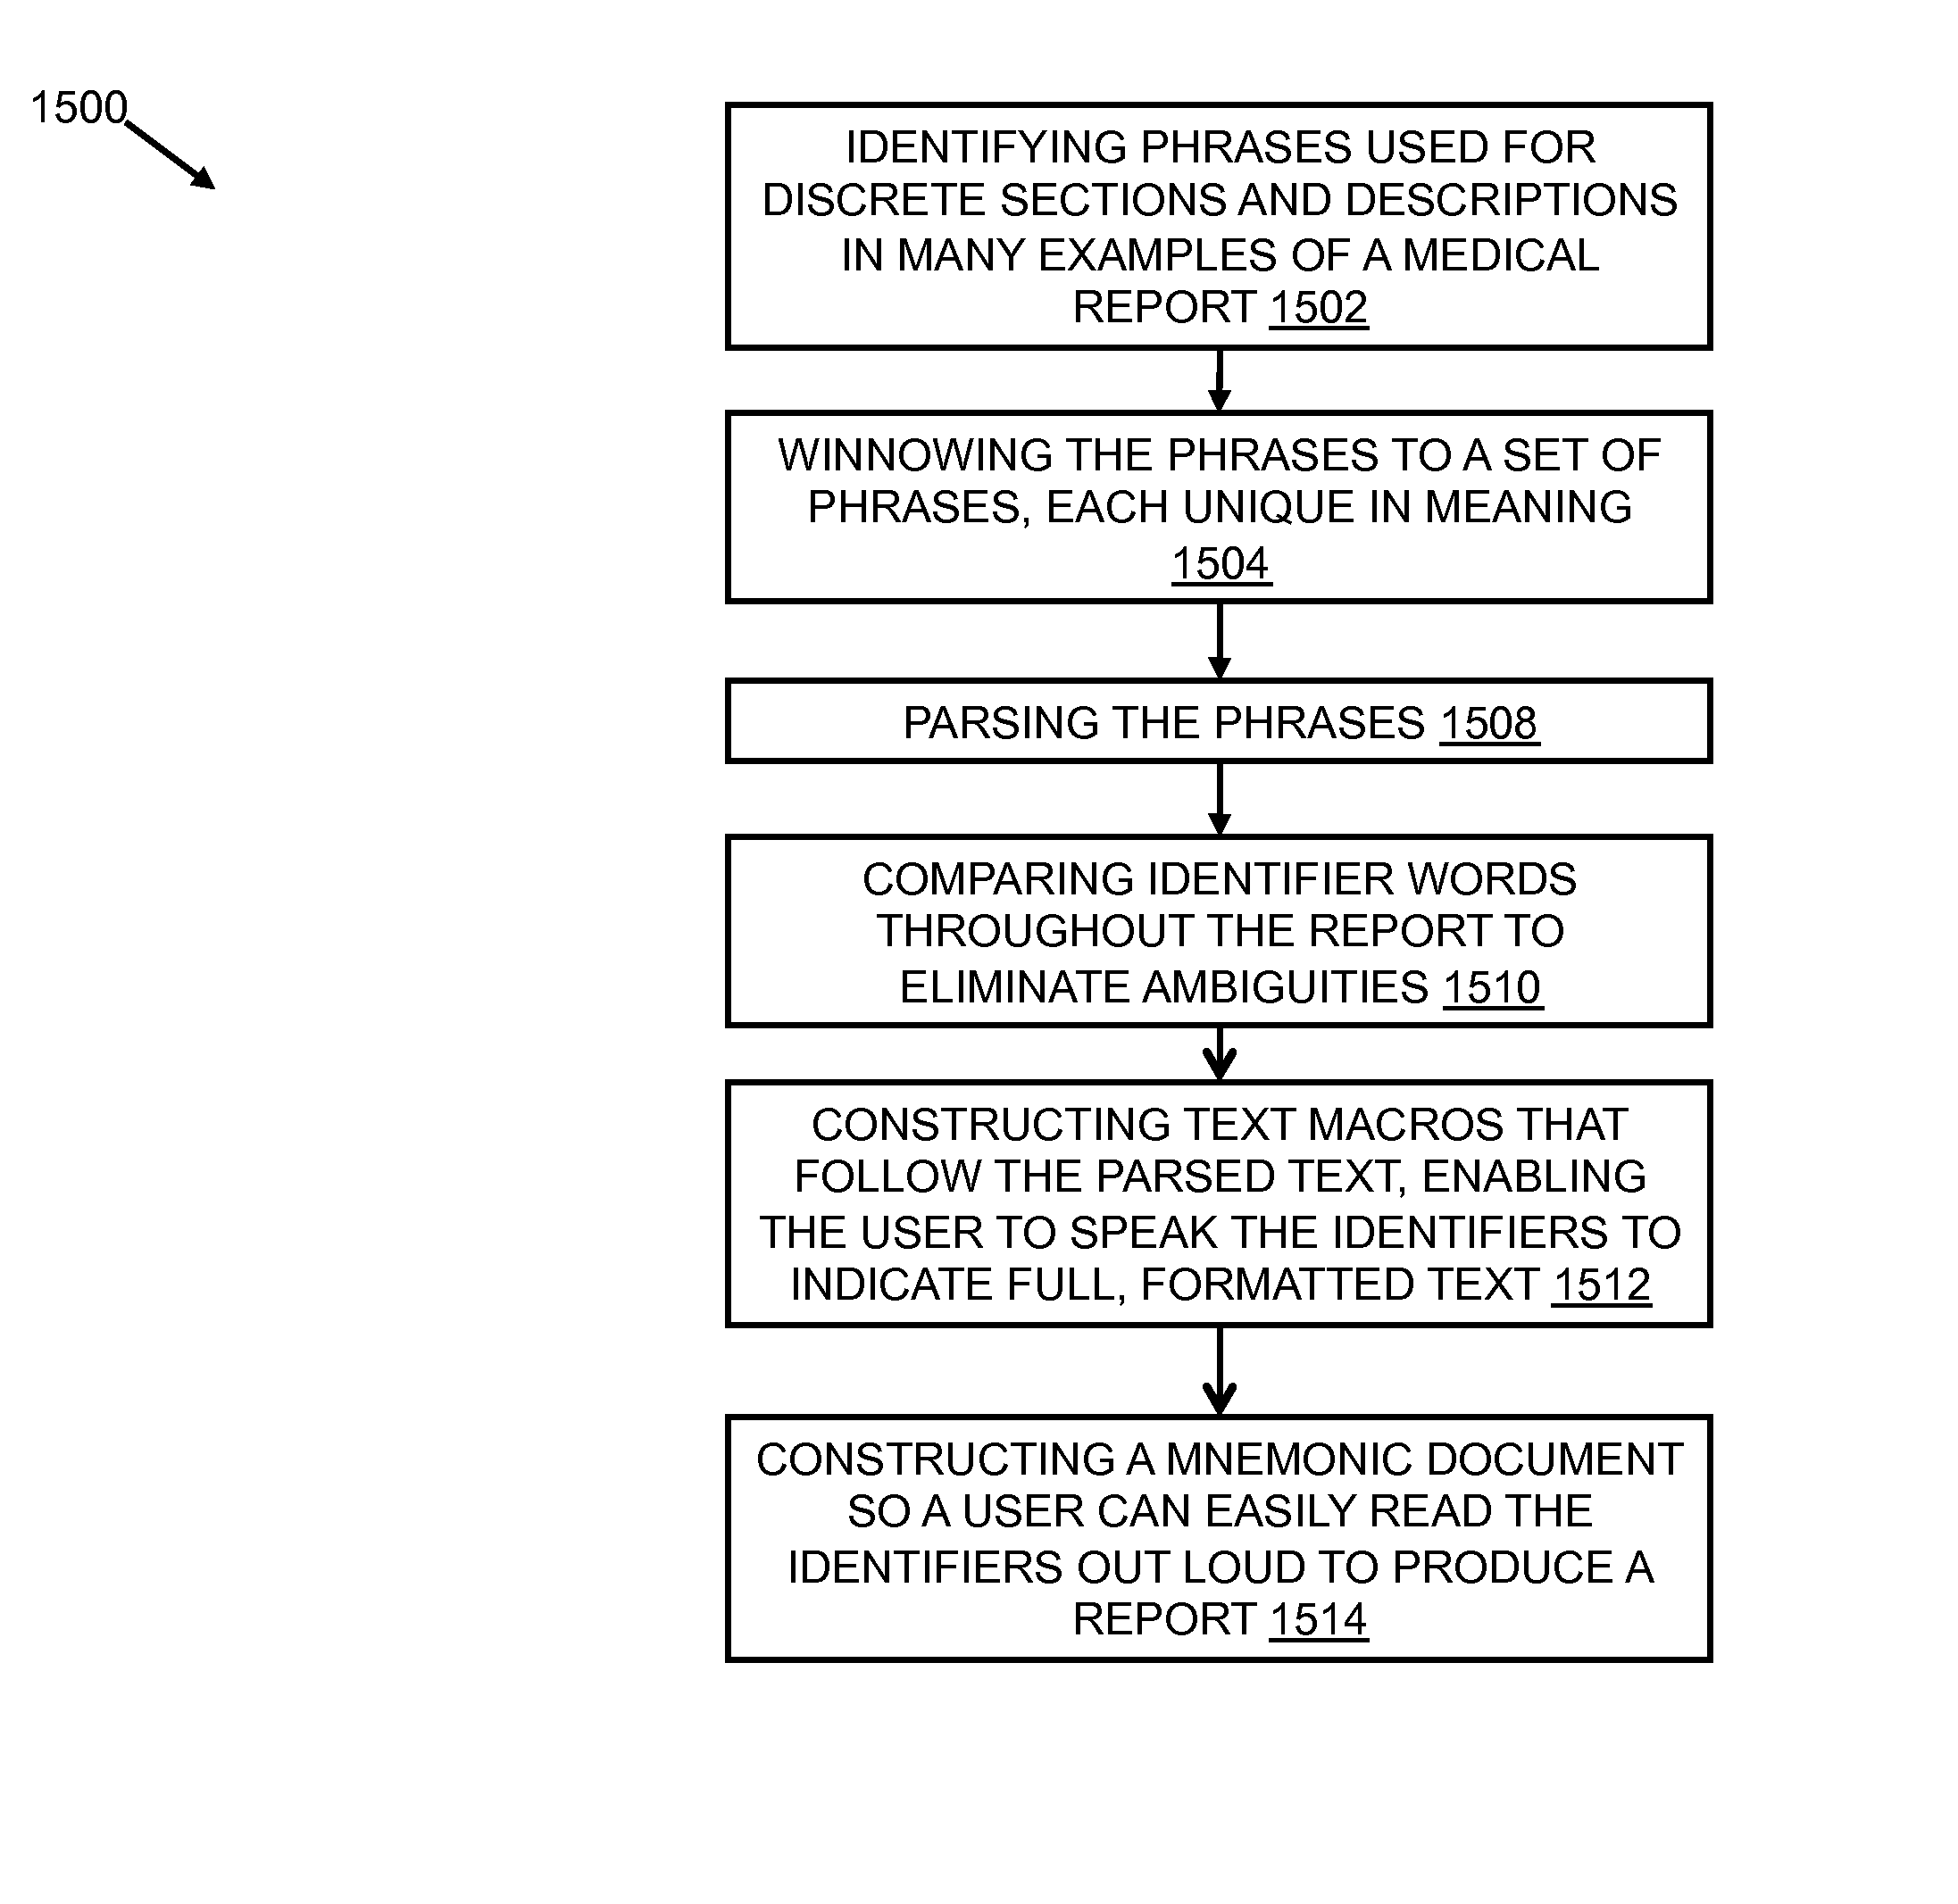 System and method of dictation for a speech recognition command system